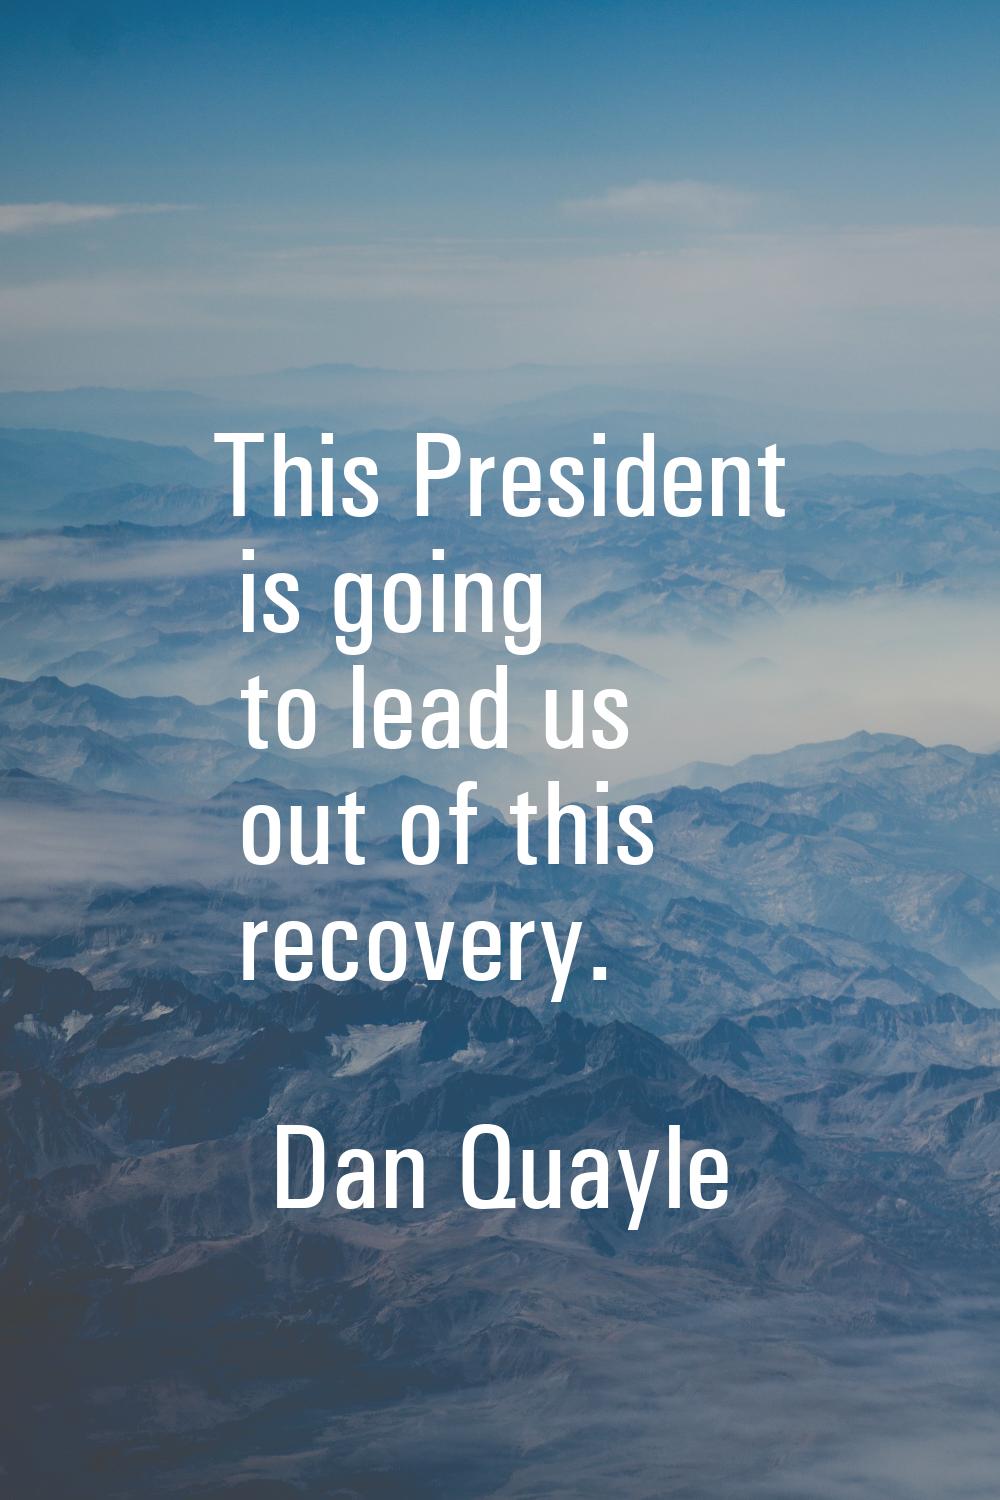 This President is going to lead us out of this recovery.